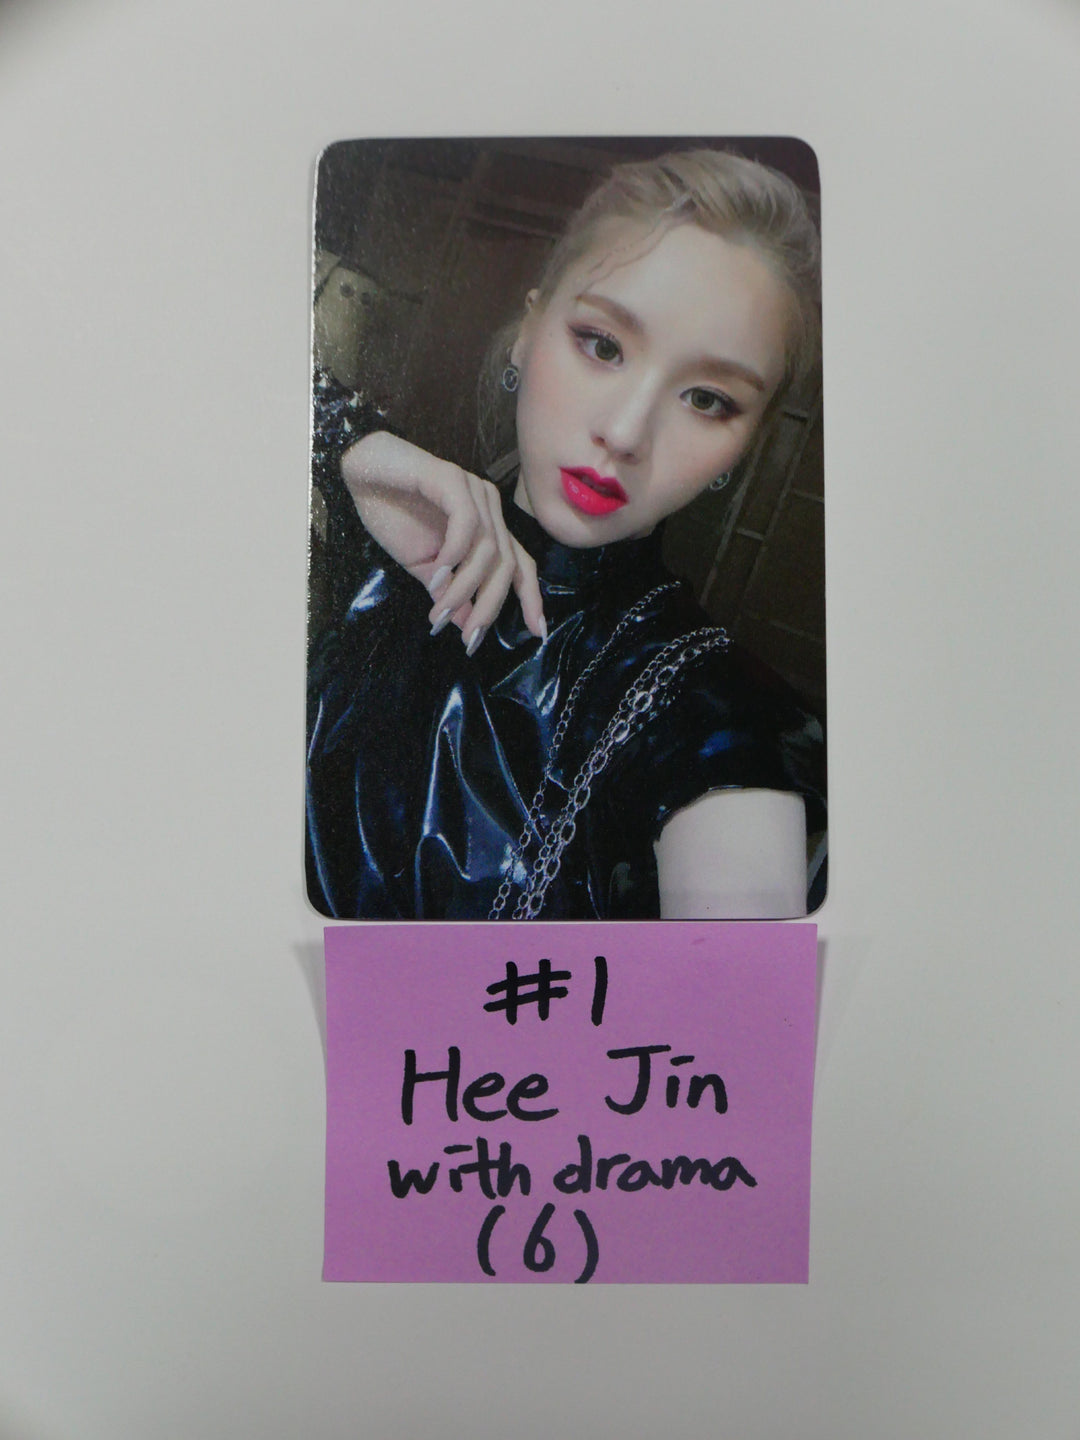 Loona '&' - Withdrama Fan Sign Event Photocard